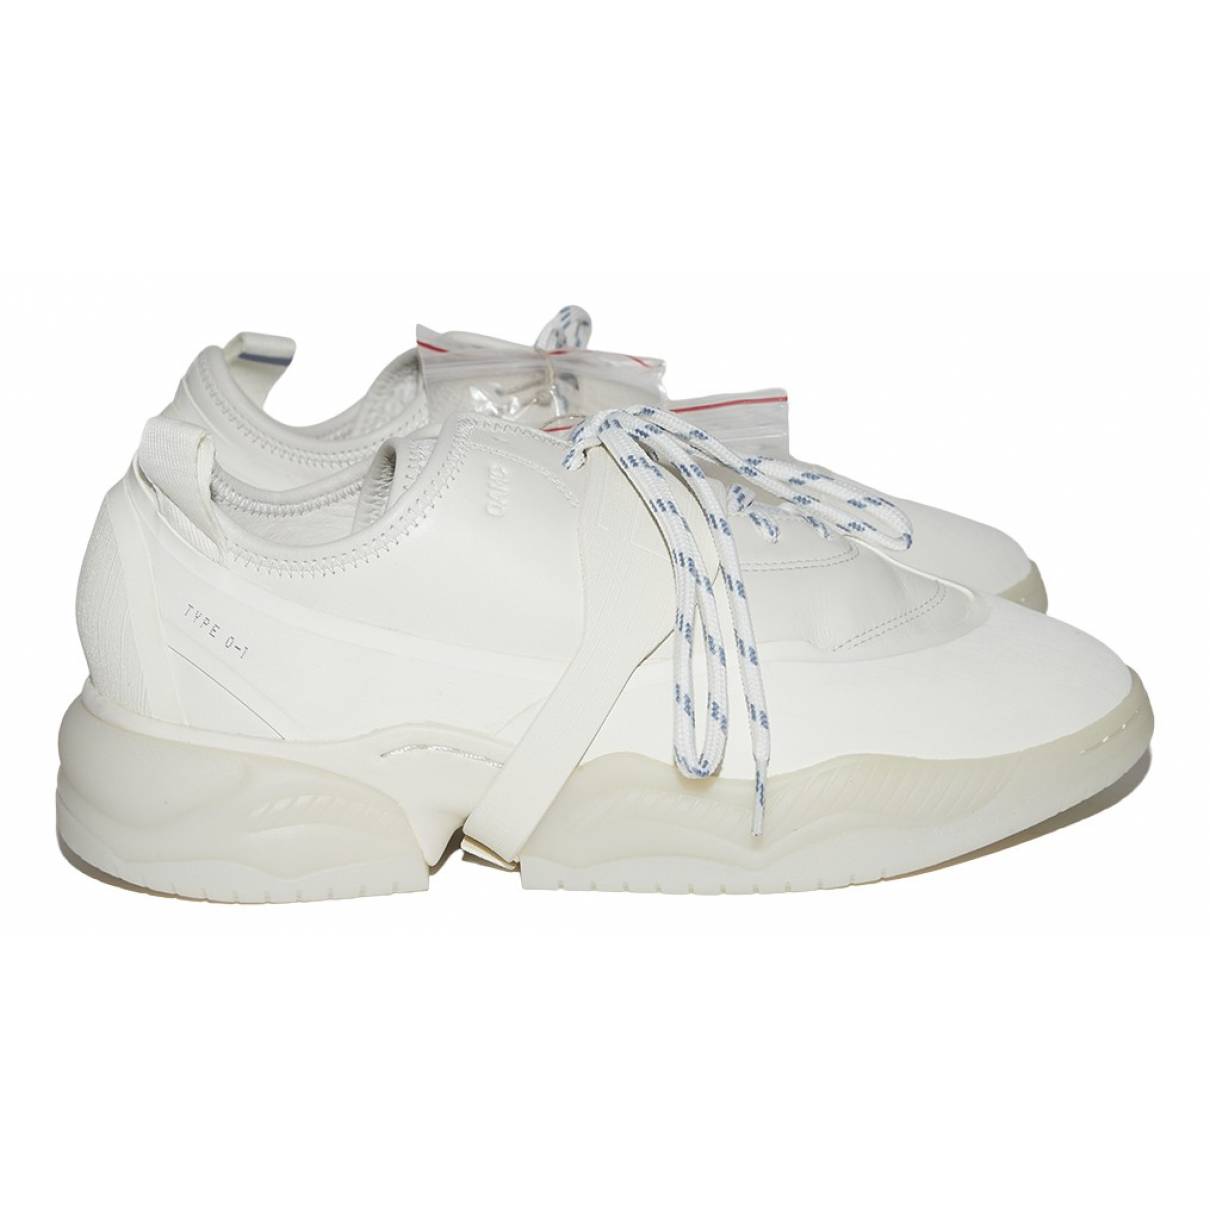 Leather low trainers Adidas x OAMC White size 44 EU in Leather